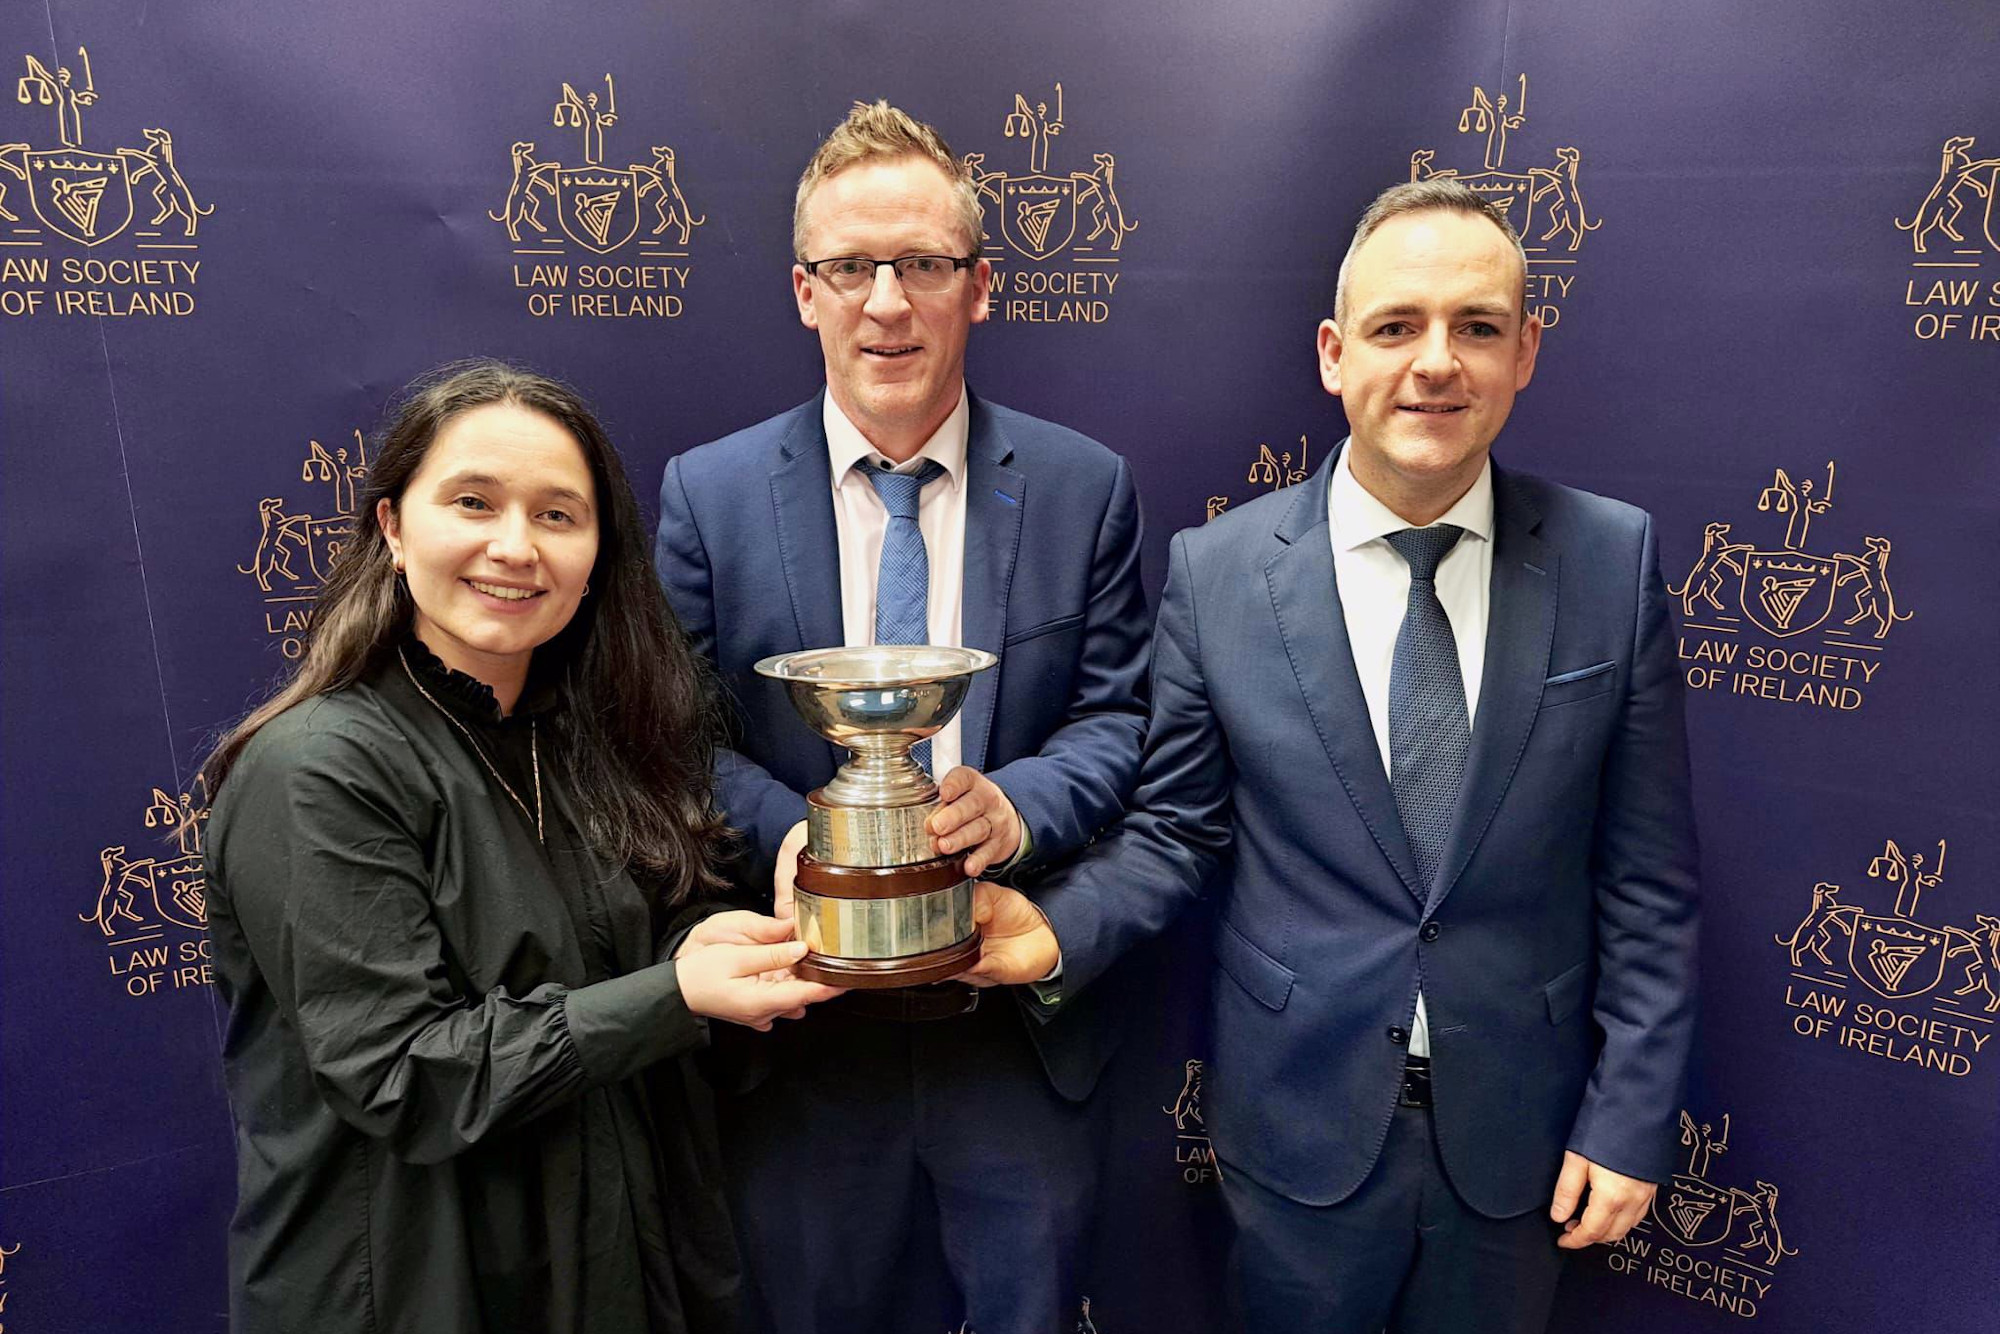 King's Inns wins National Negotiation Competition again